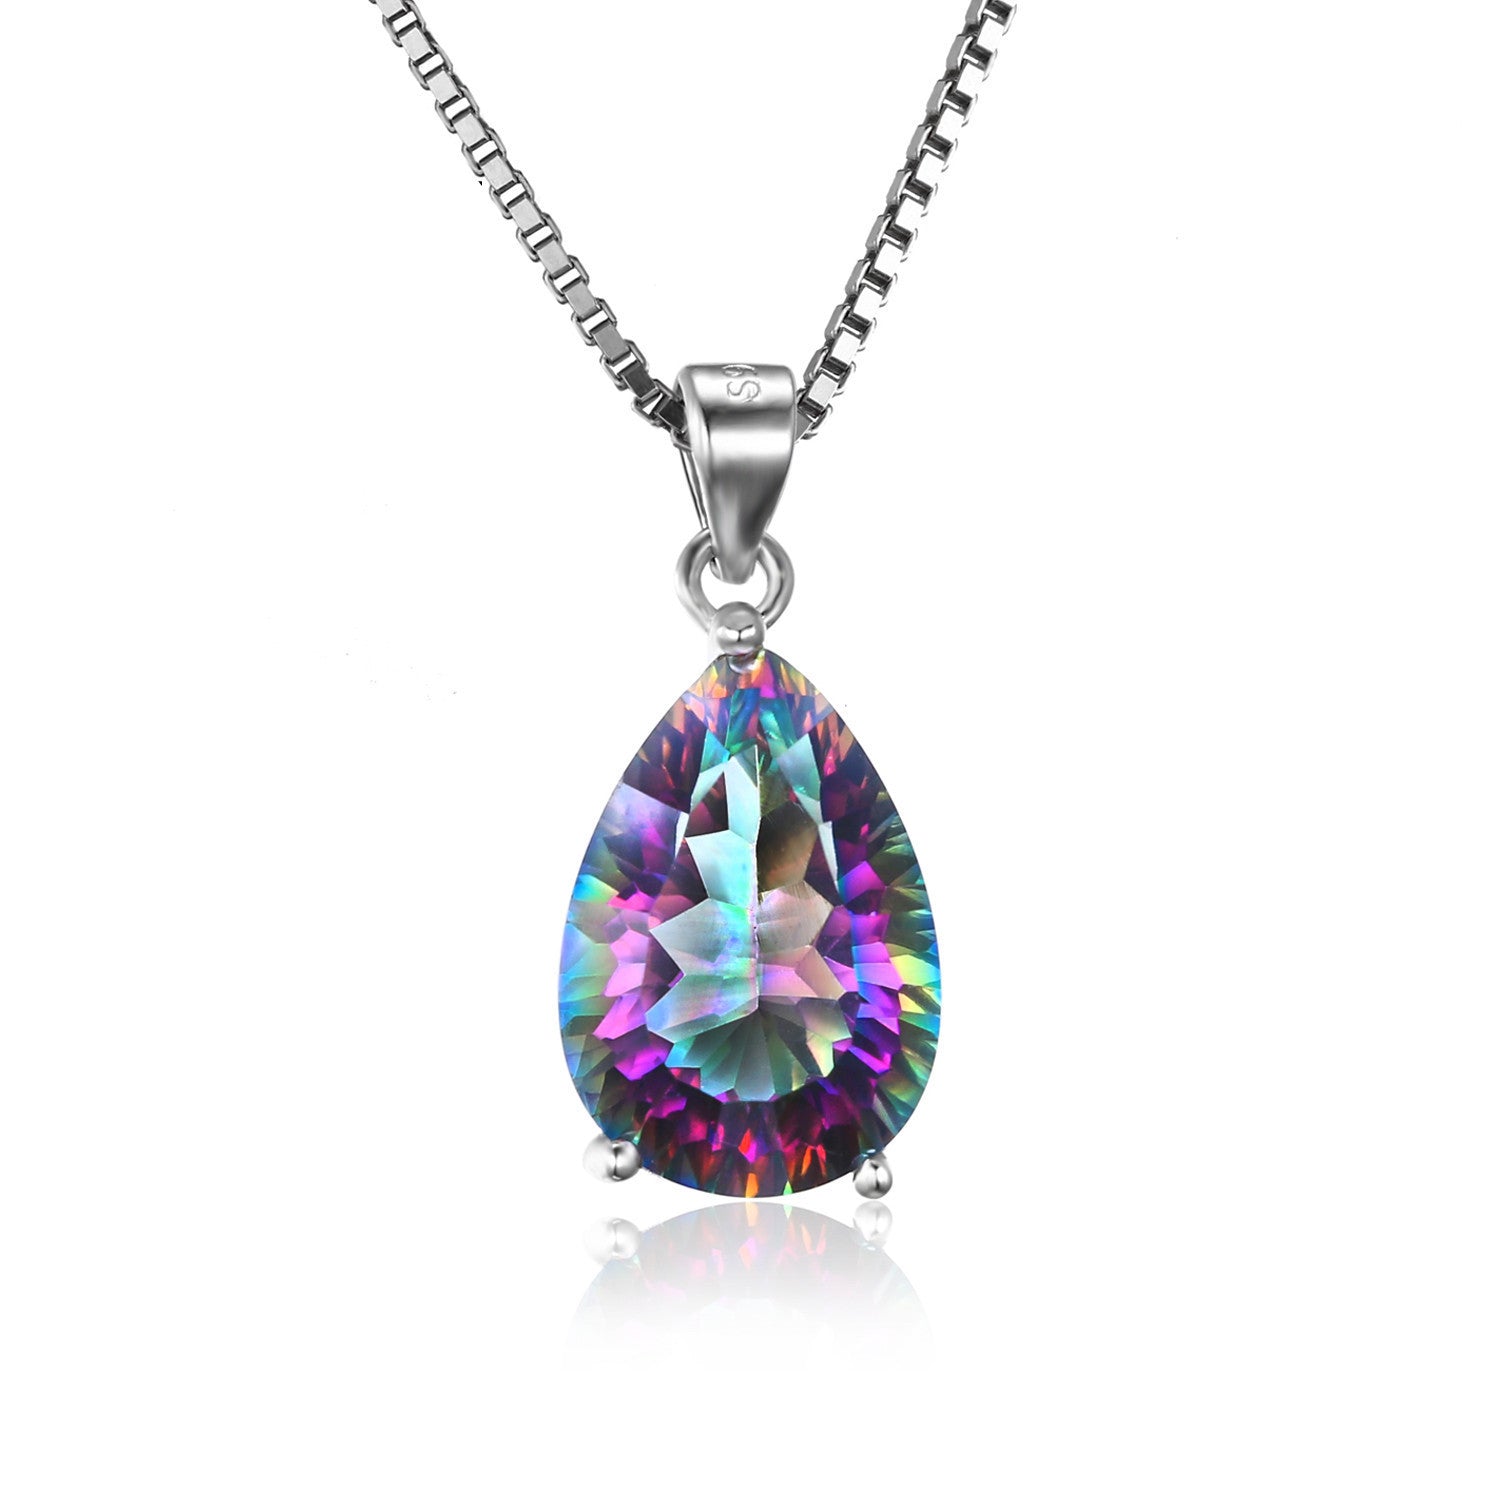 4ct Genuine Multicolor Rainbow Fire Mystic Topaz Pendant Pear Real Pure 925 sterling Silver Brand New For Women - CelebritystyleFashion.com.au online clothing shop australia